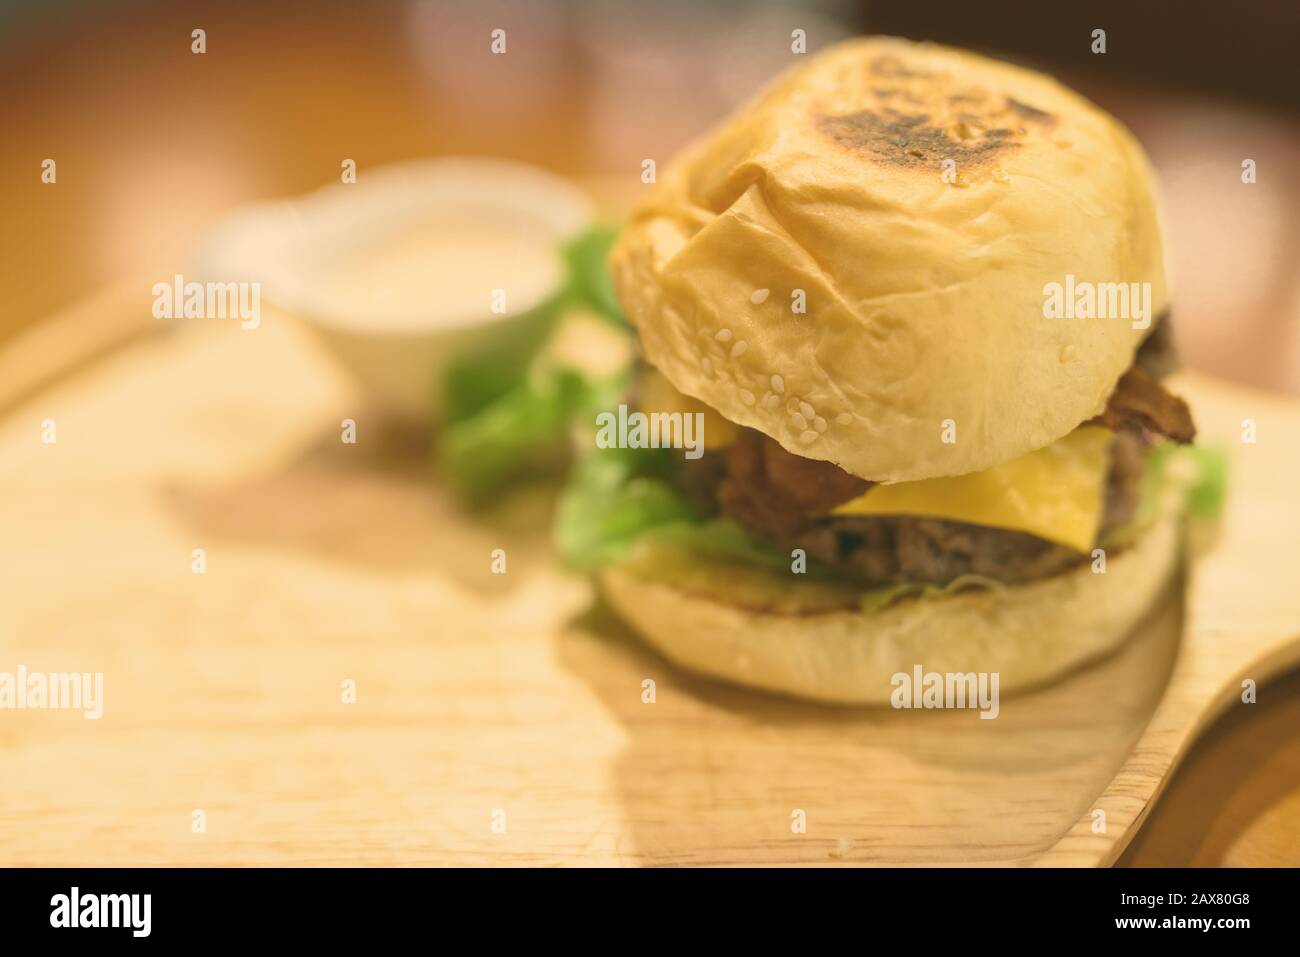 Portrait Of Cheeseburger Served On Wooden Table Stock Photo